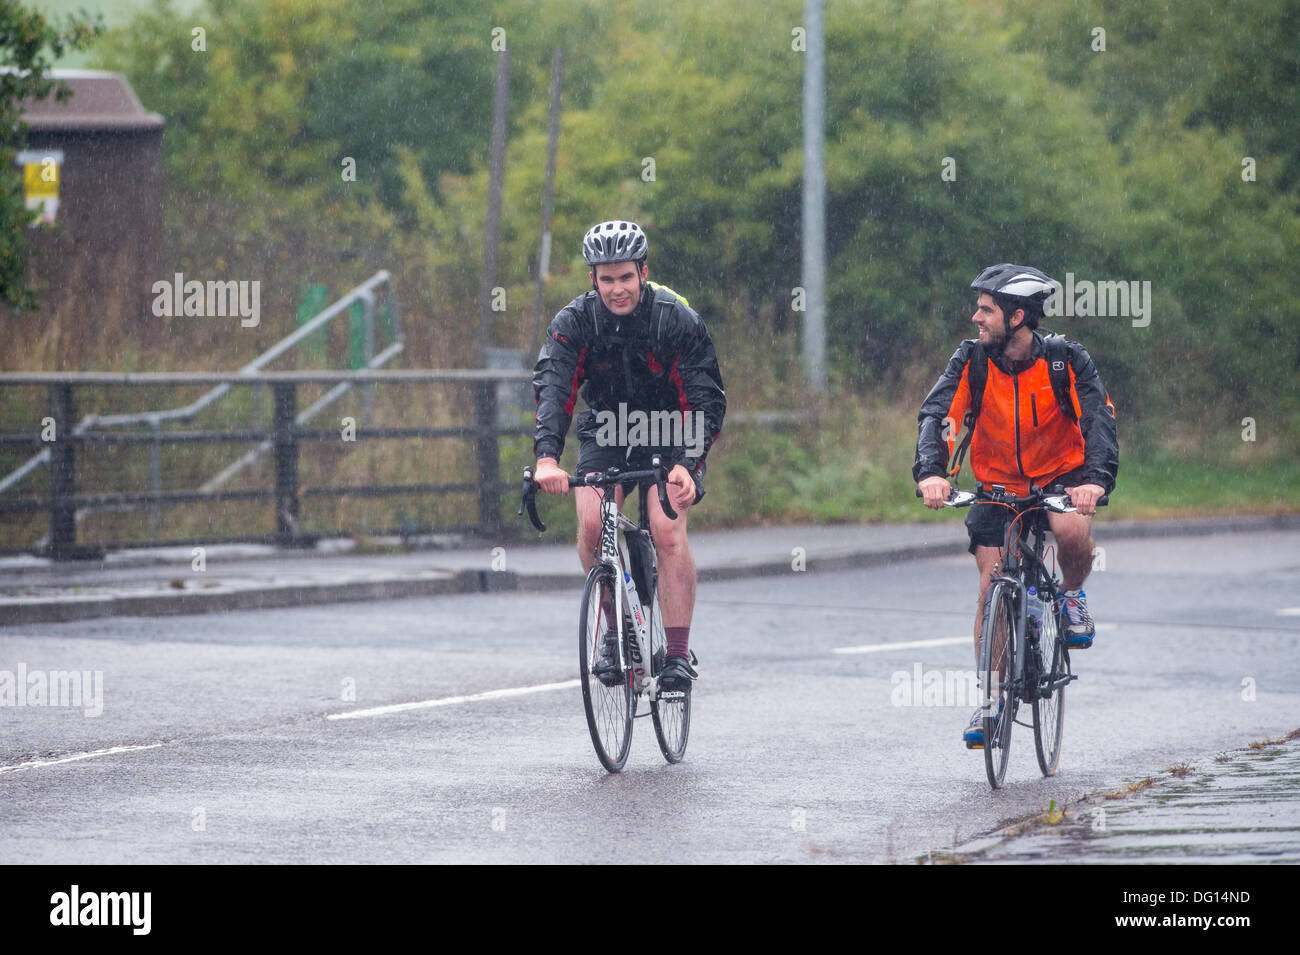 M25 at Brentwood, Essex. 11th October 2013. Weather warnings have been issued for strong winds and heavy rain for parts of the UK. Two hardy cyclists who are cycling from London to The Hague in Holland still manage to find a smile as a soggy and windy journey looms ahead of them. Credit:  Allsorts Stock Photo/Alamy Live News Stock Photo